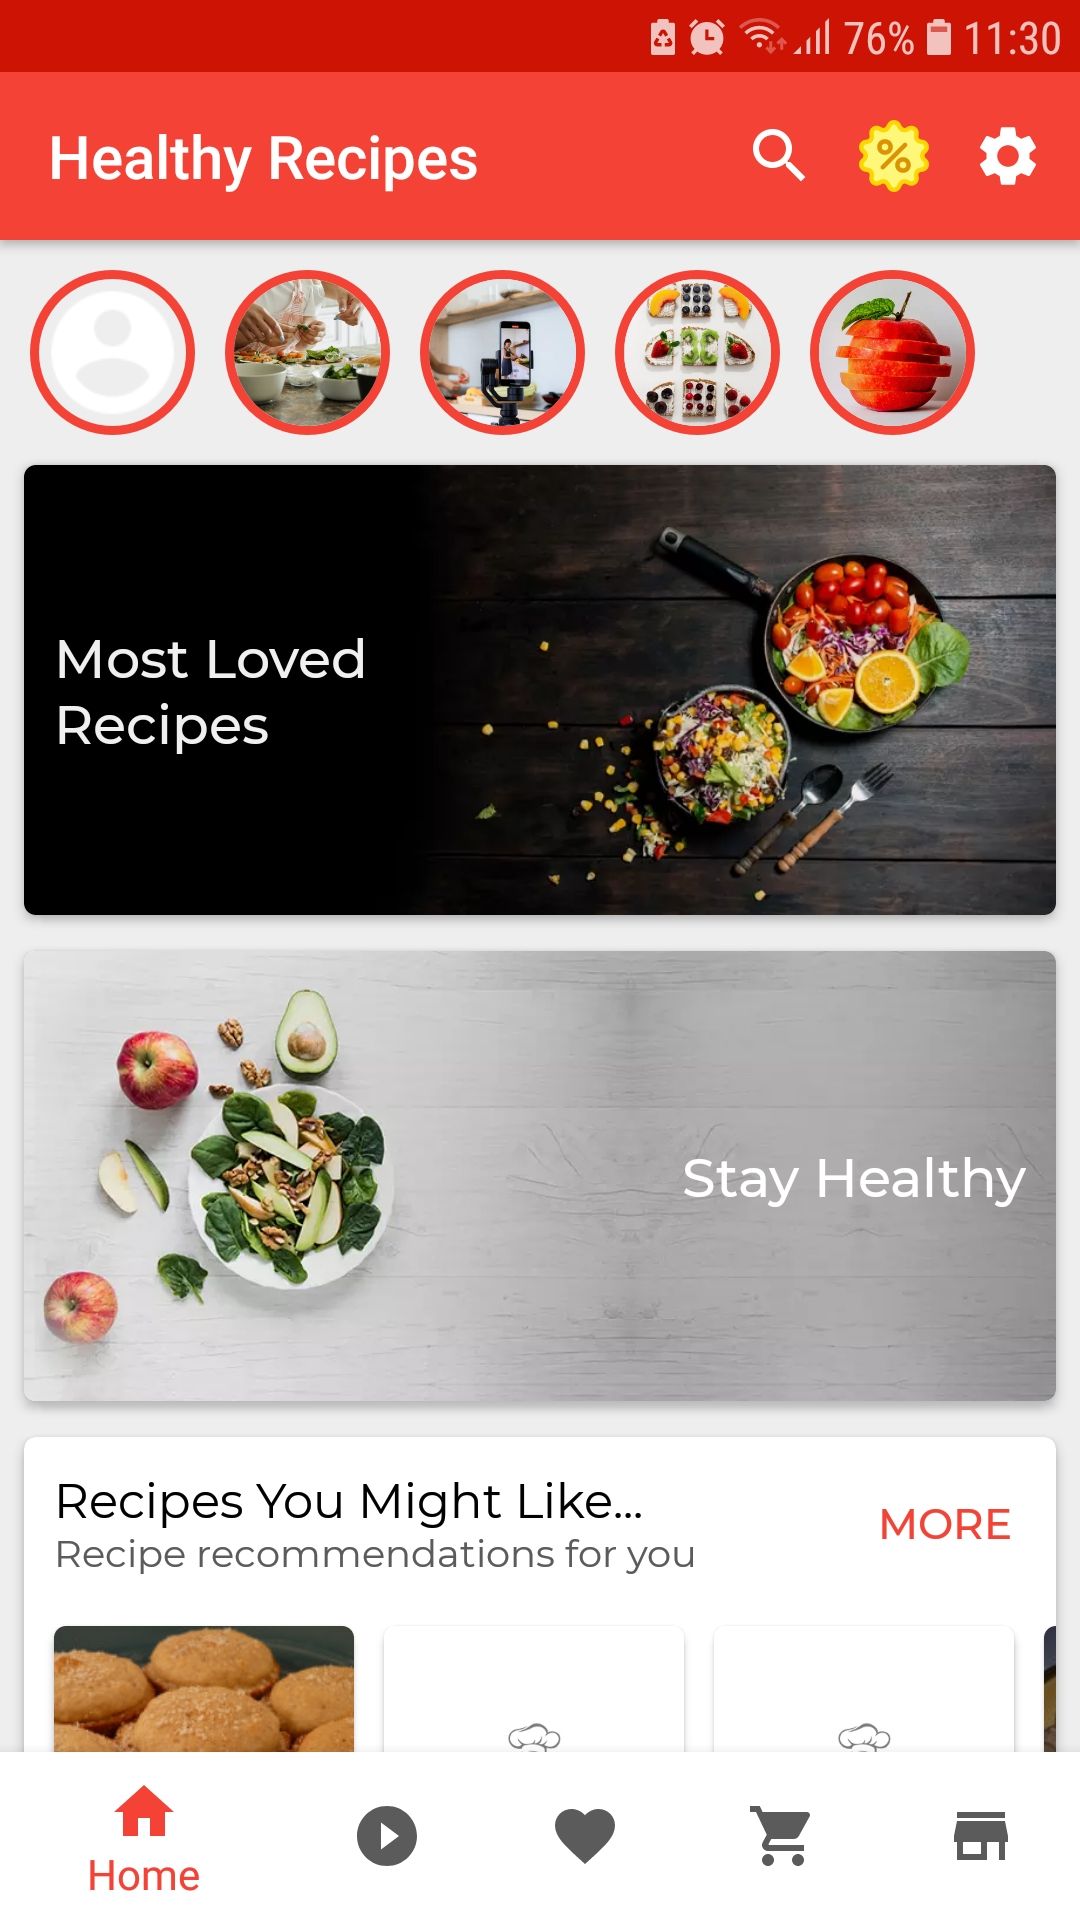 Healthy Recipes mobile healthy cooking app home